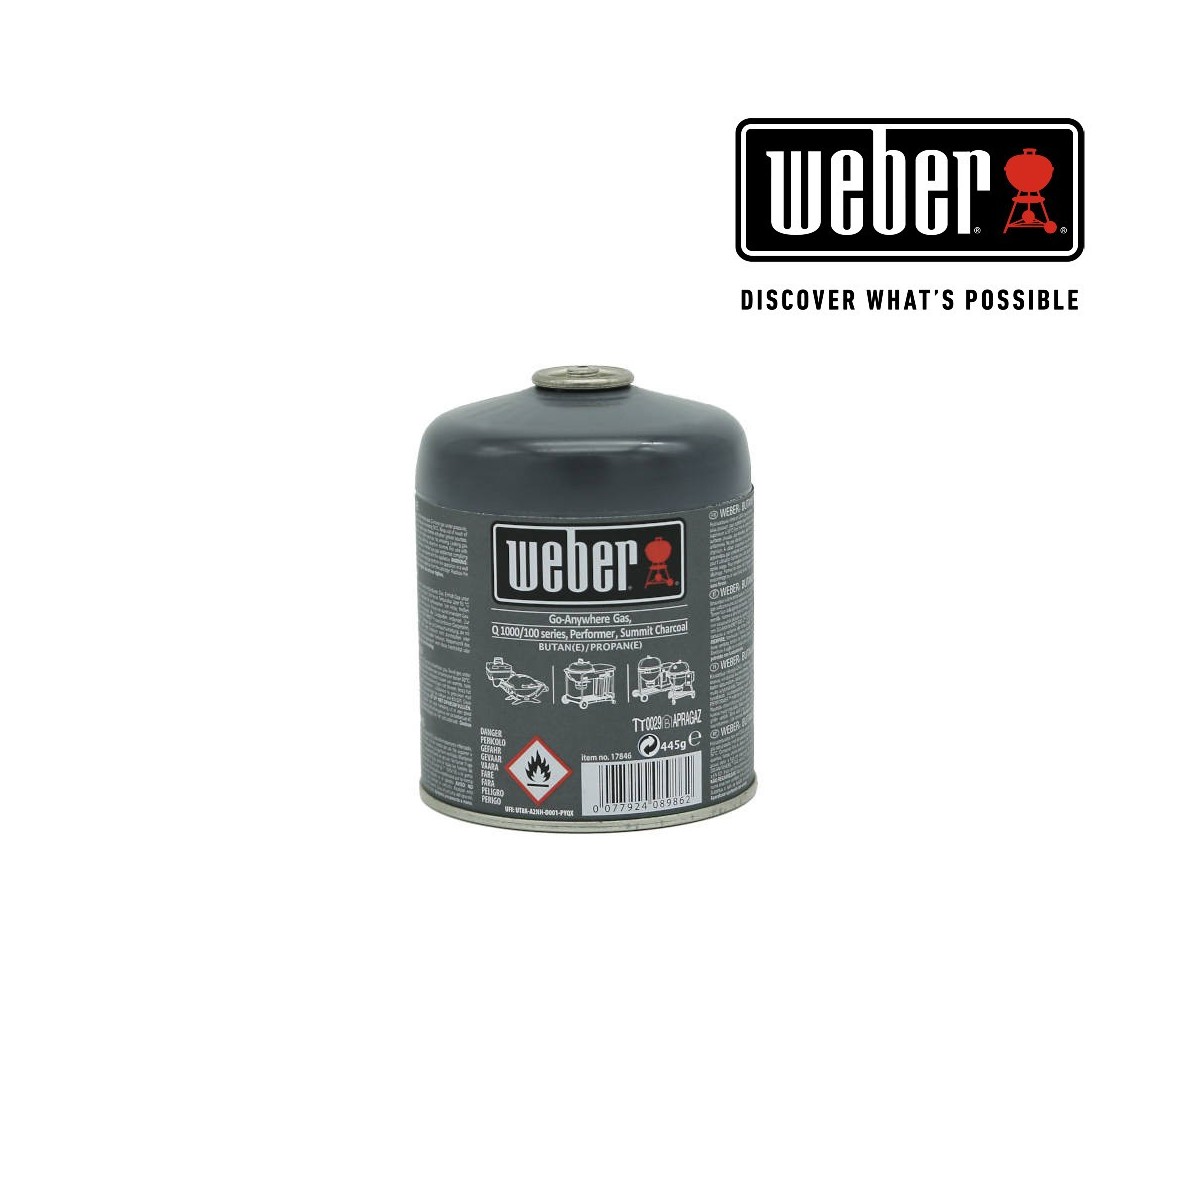 WEBER DISPOSABLE GAS CANISTER - 445G for Q 100/1000 series, Go-Anywhere Gas, Performer Deluxe Gourmet Grills, 17846